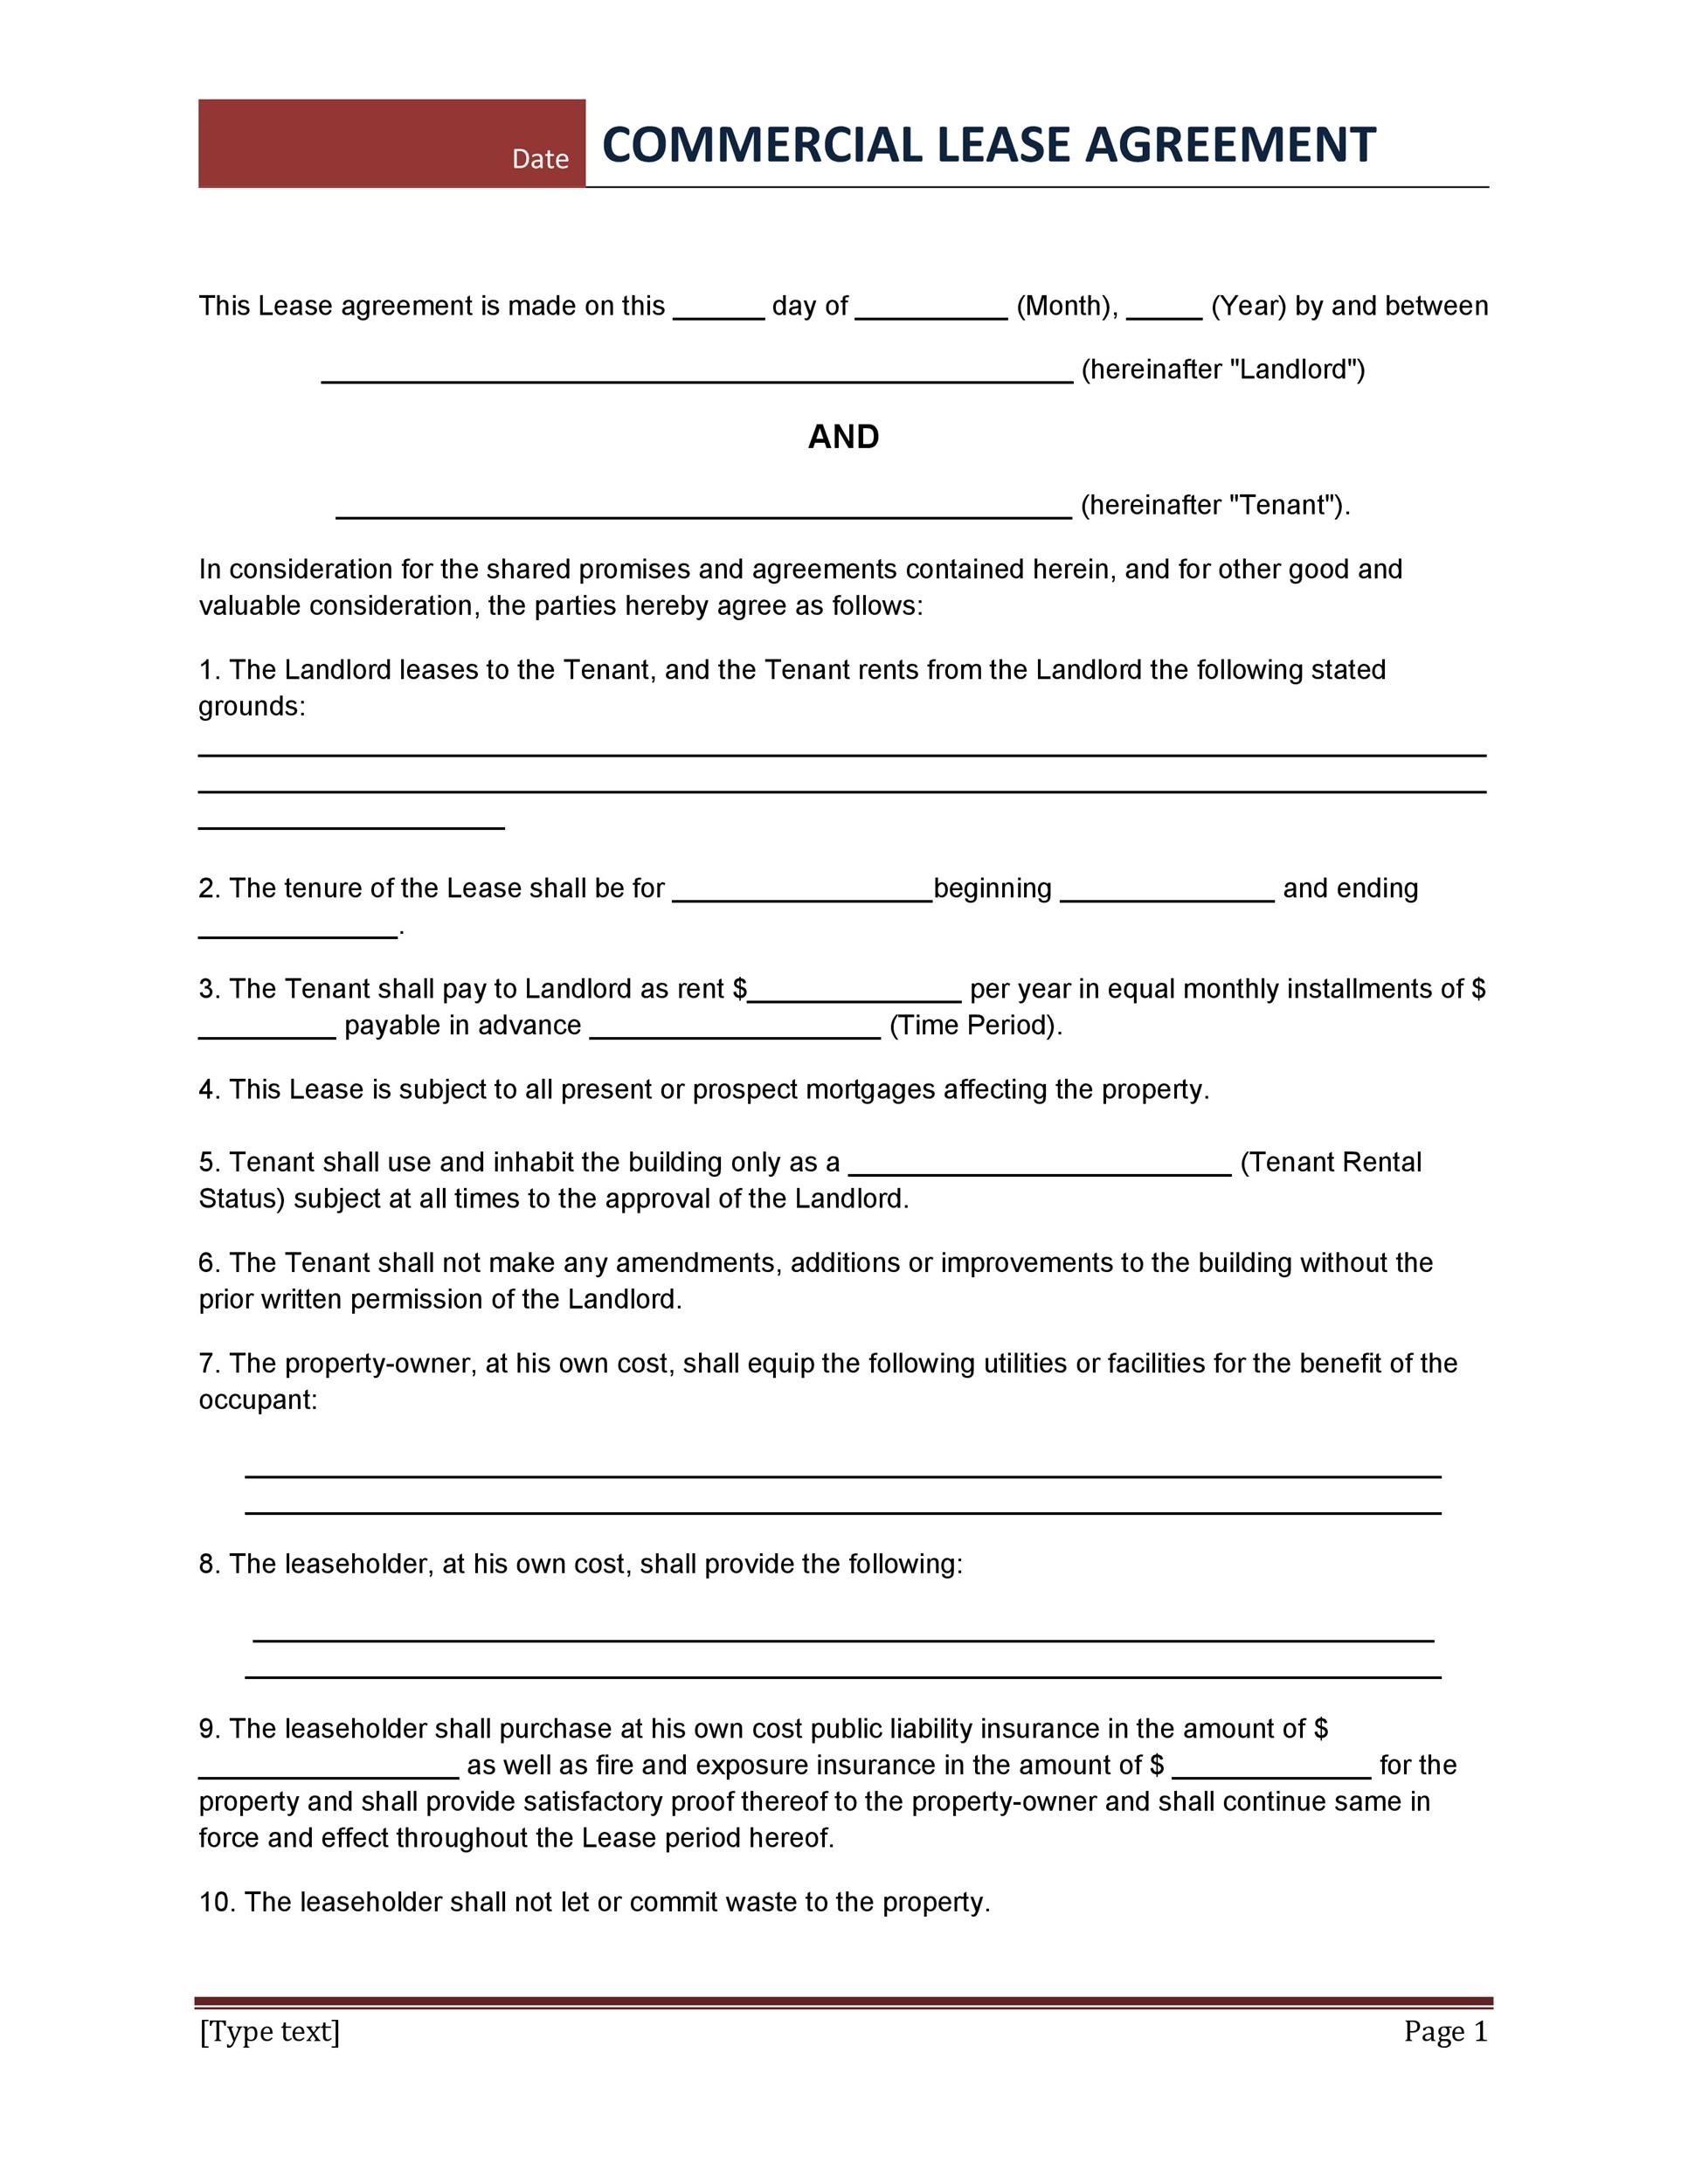 assignment of retail lease